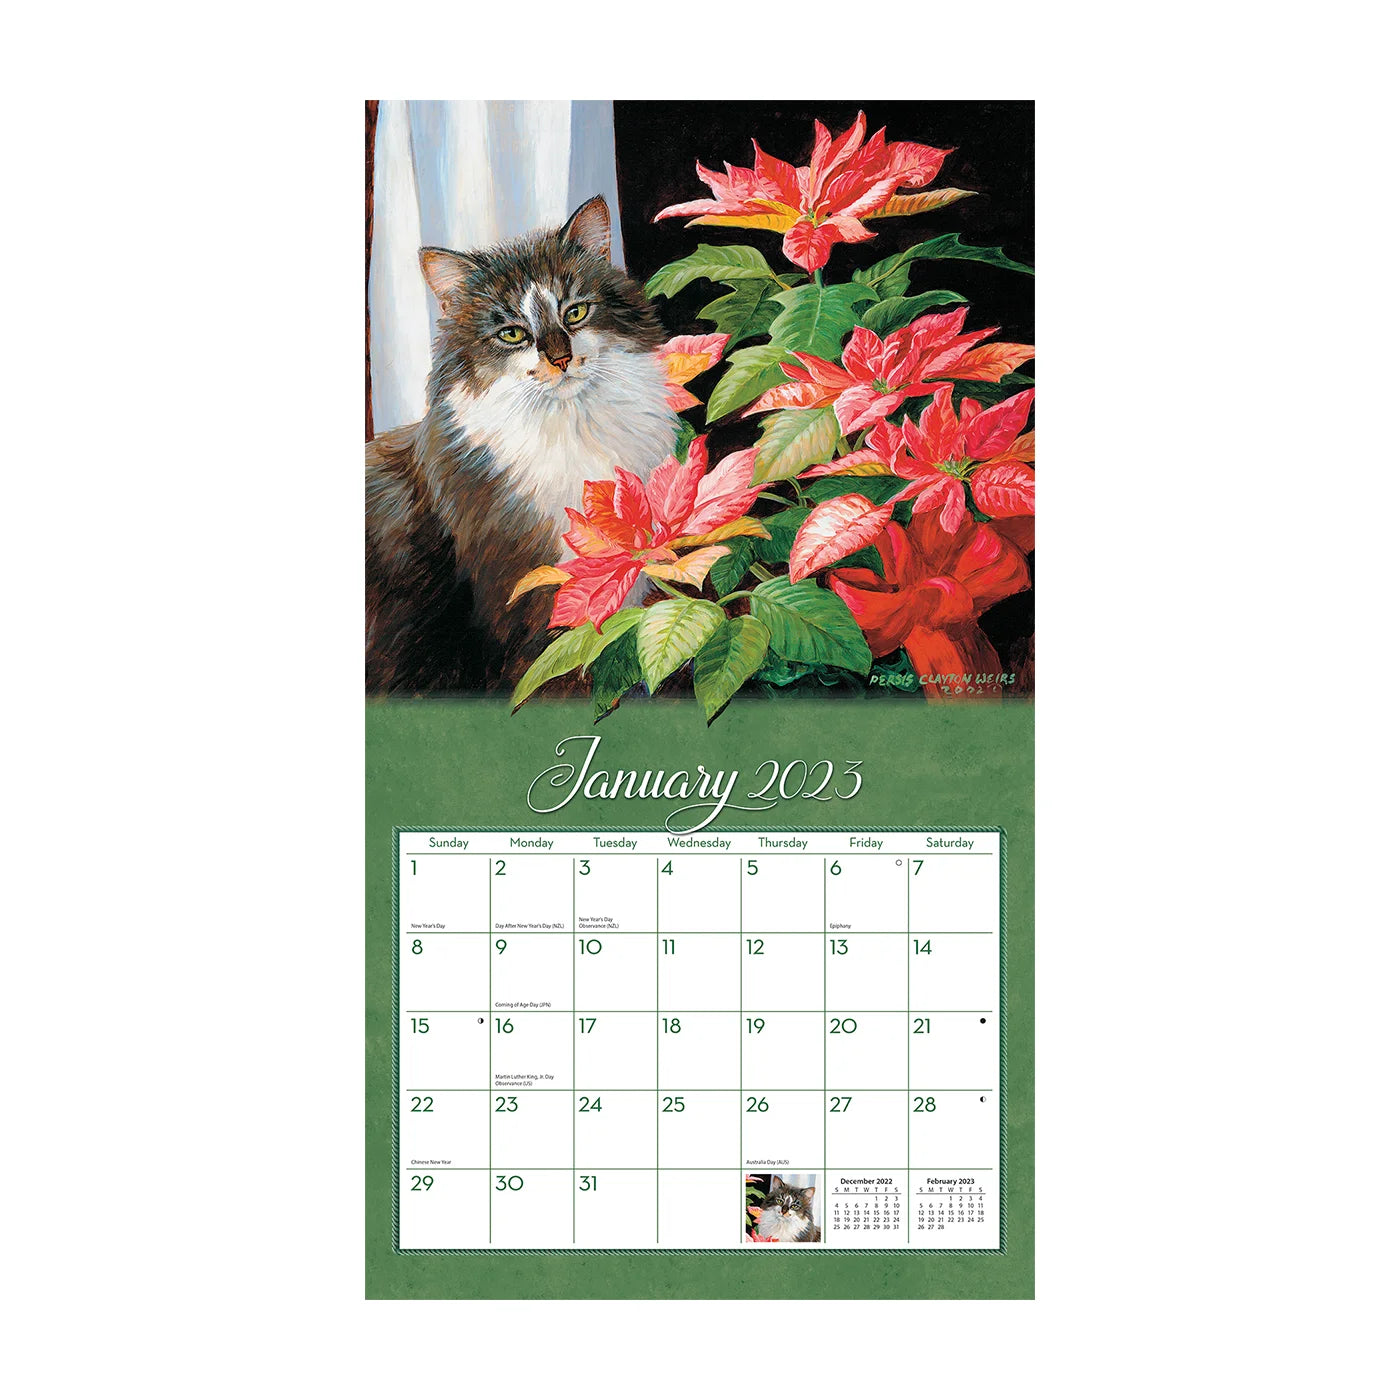 2023 LANG Love of Cats By Persis Clayton Weirs - Deluxe Wall Calendar